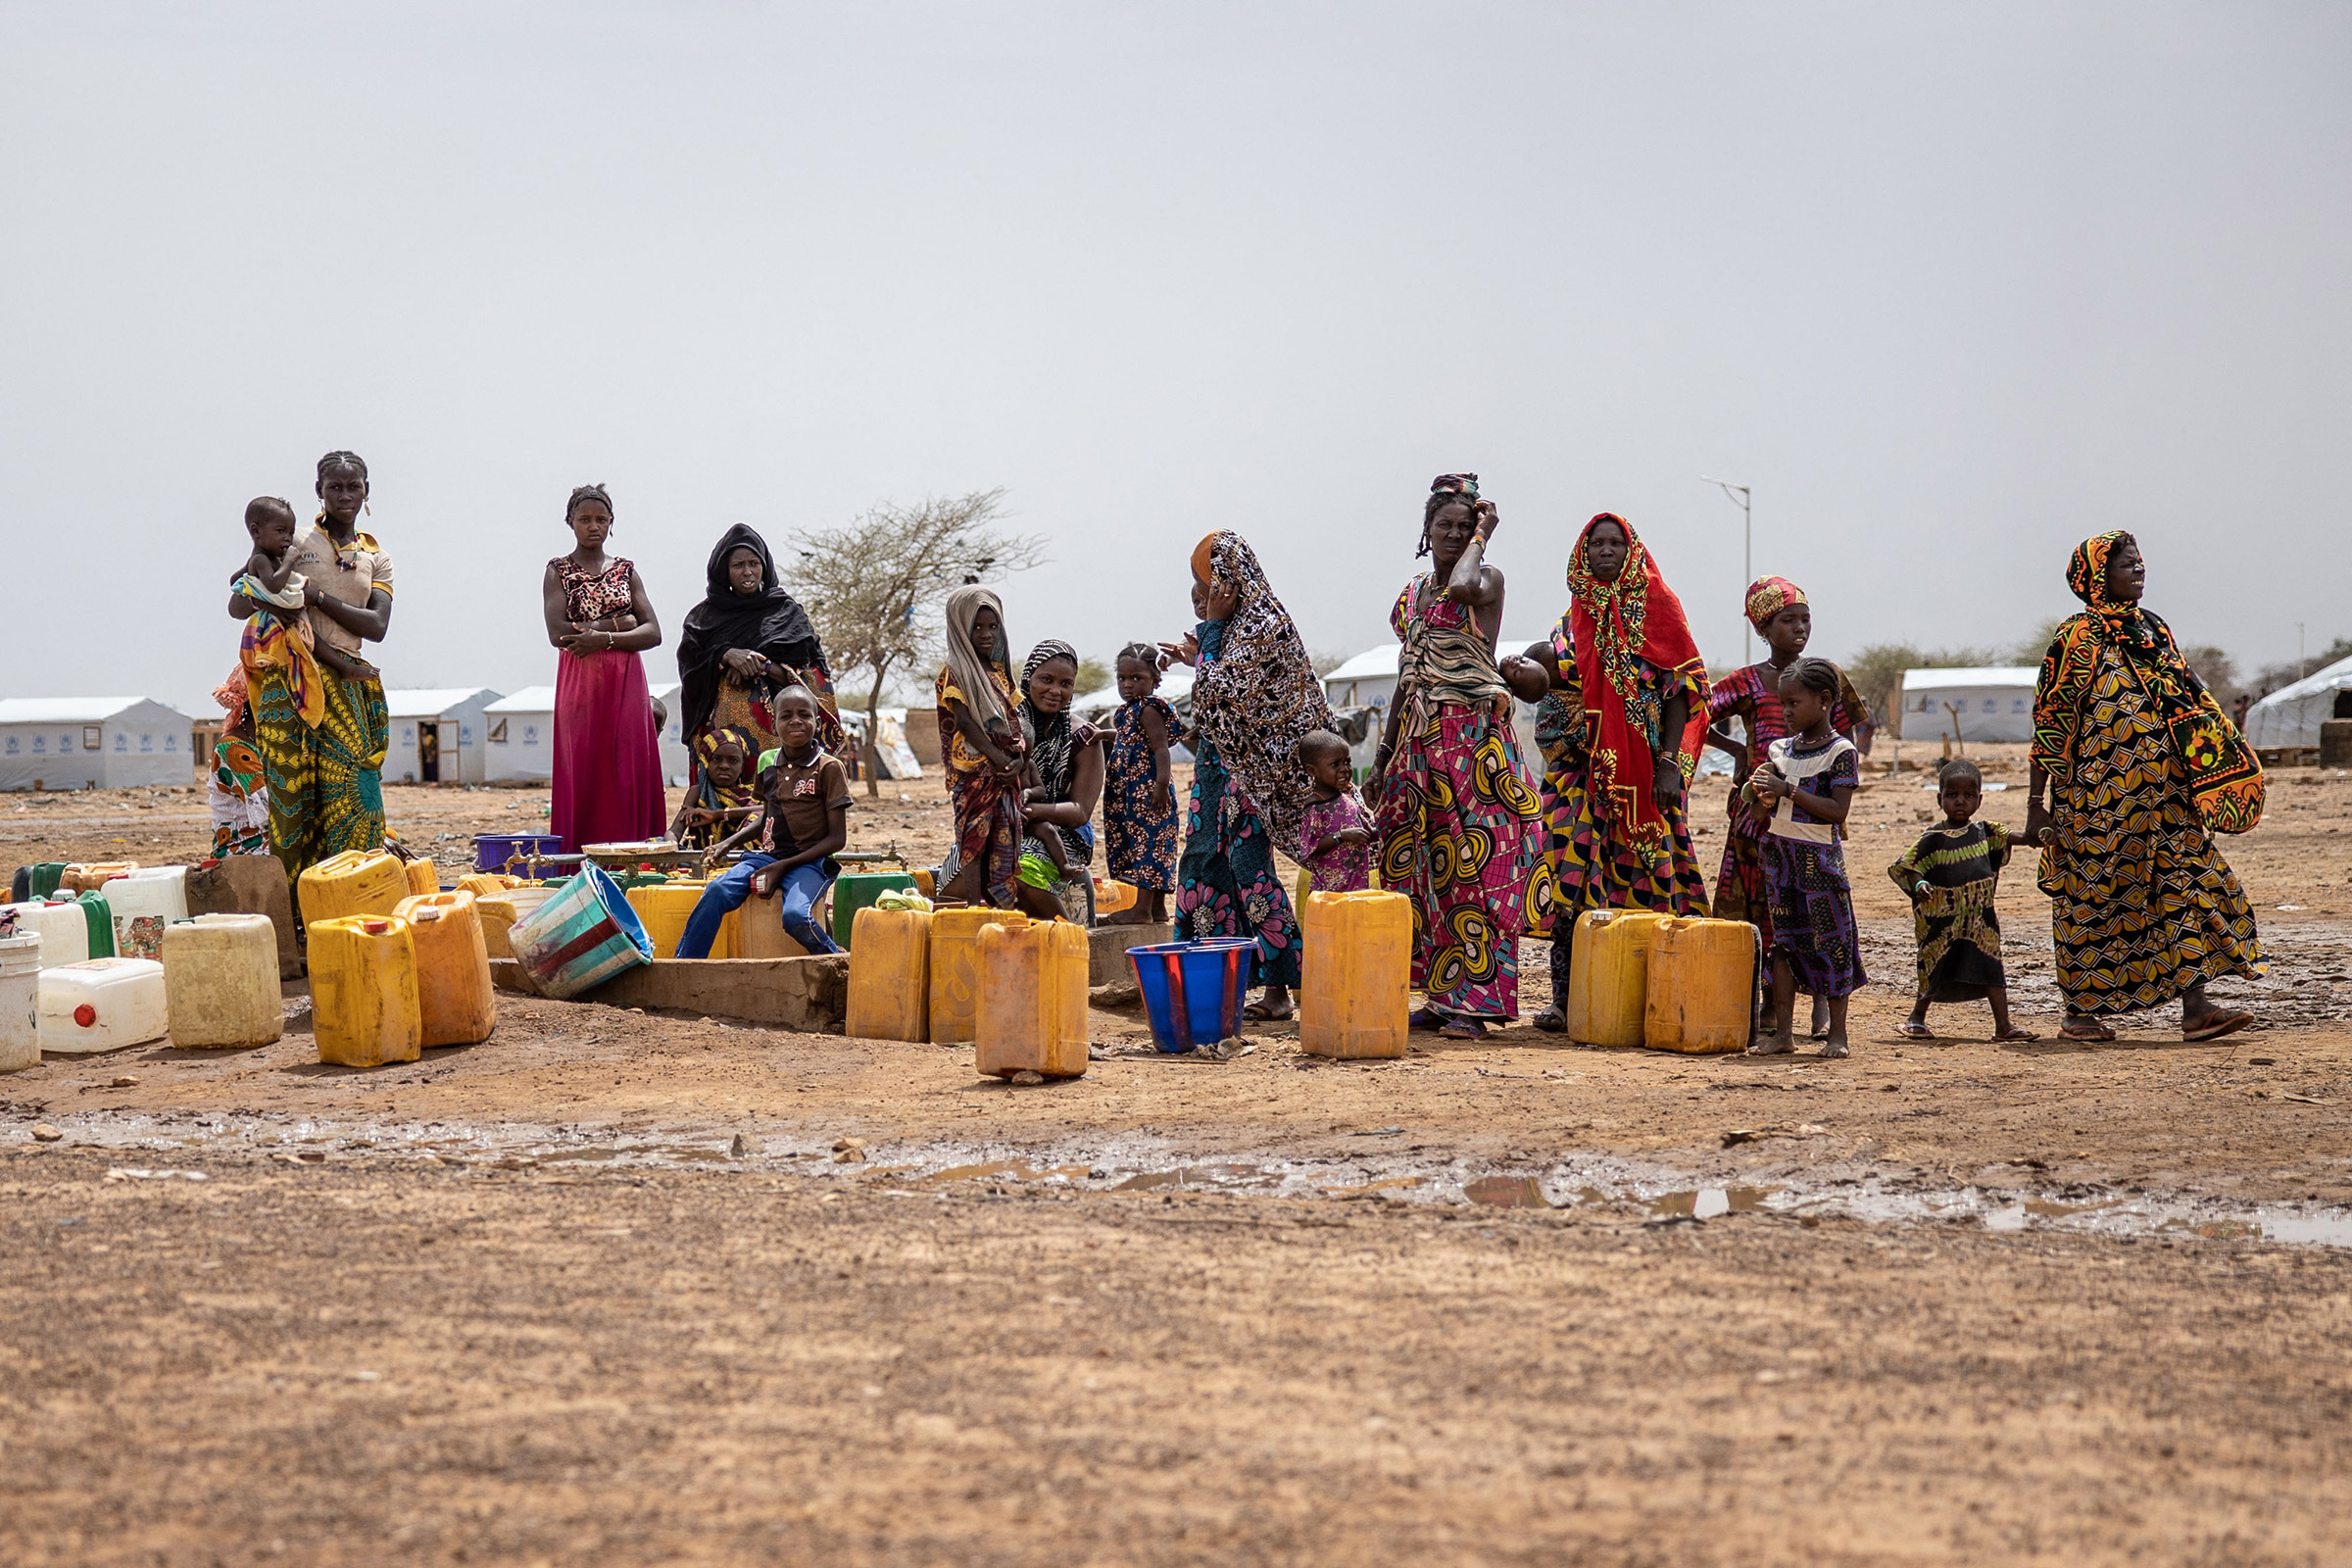 Women line up for water at Goudoubo camp in Burkina Faso, on June 20. The camp is sheltering thousands of Malians who have fled jihadist violence in the region. (Olympia de Maismont—AFP/Getty Images)